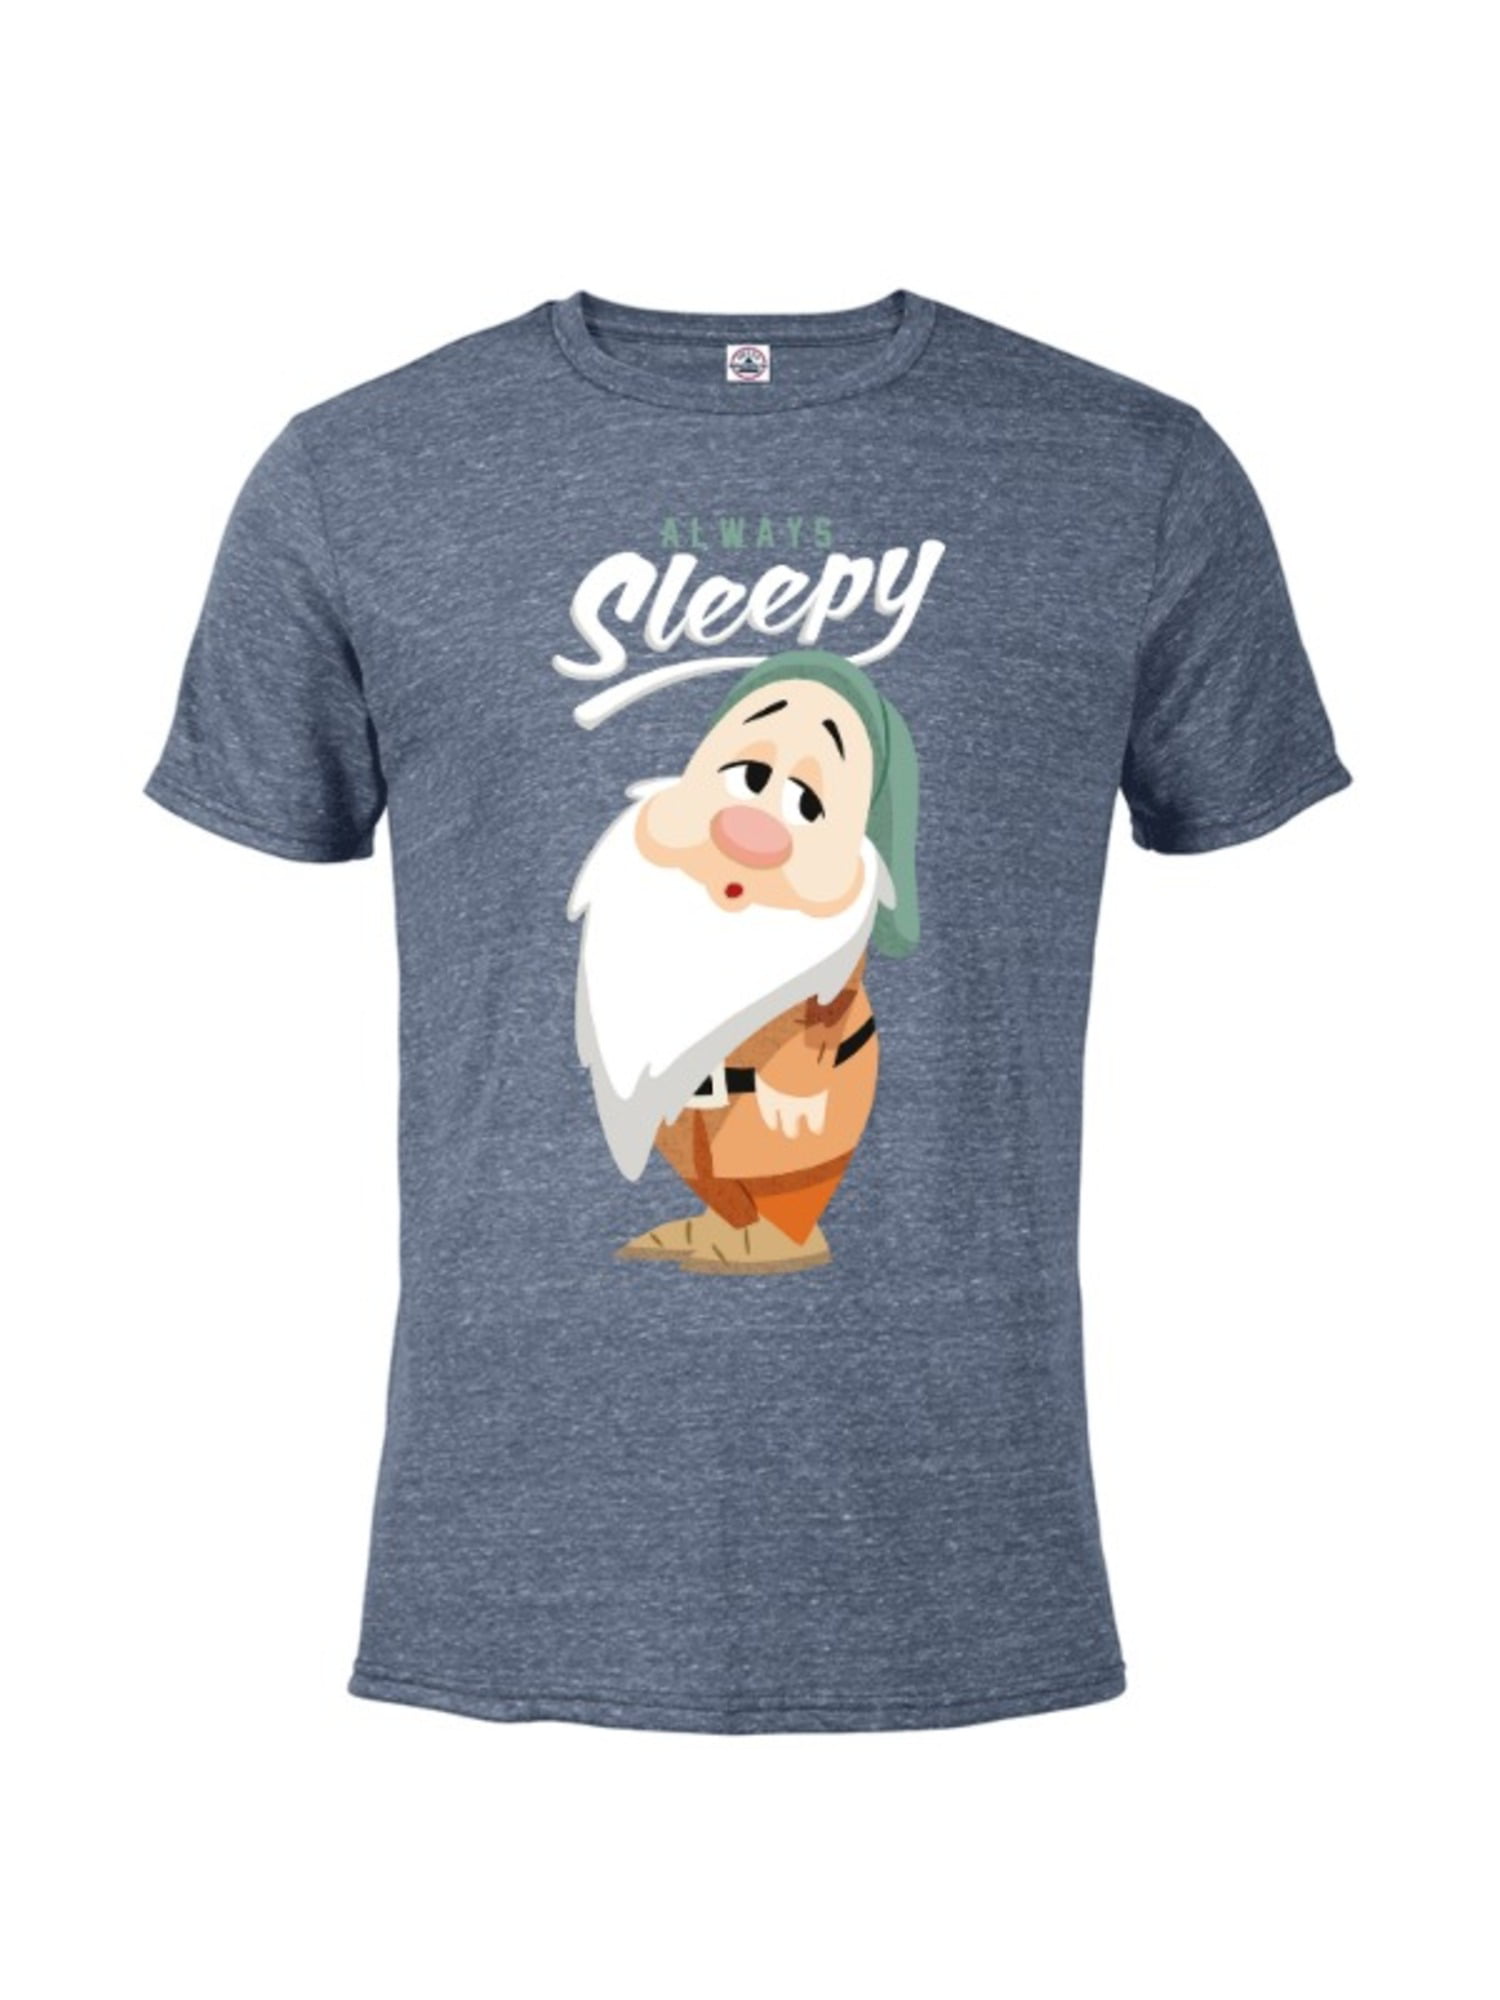 Food and Wine Disney Drinking Shirts Beer Shirt Seven Dwarfs Drinking Shirt,Sneezy Dwarf Shirt Heigh-Ho Heigh-Ho It's Off to Drink We Go